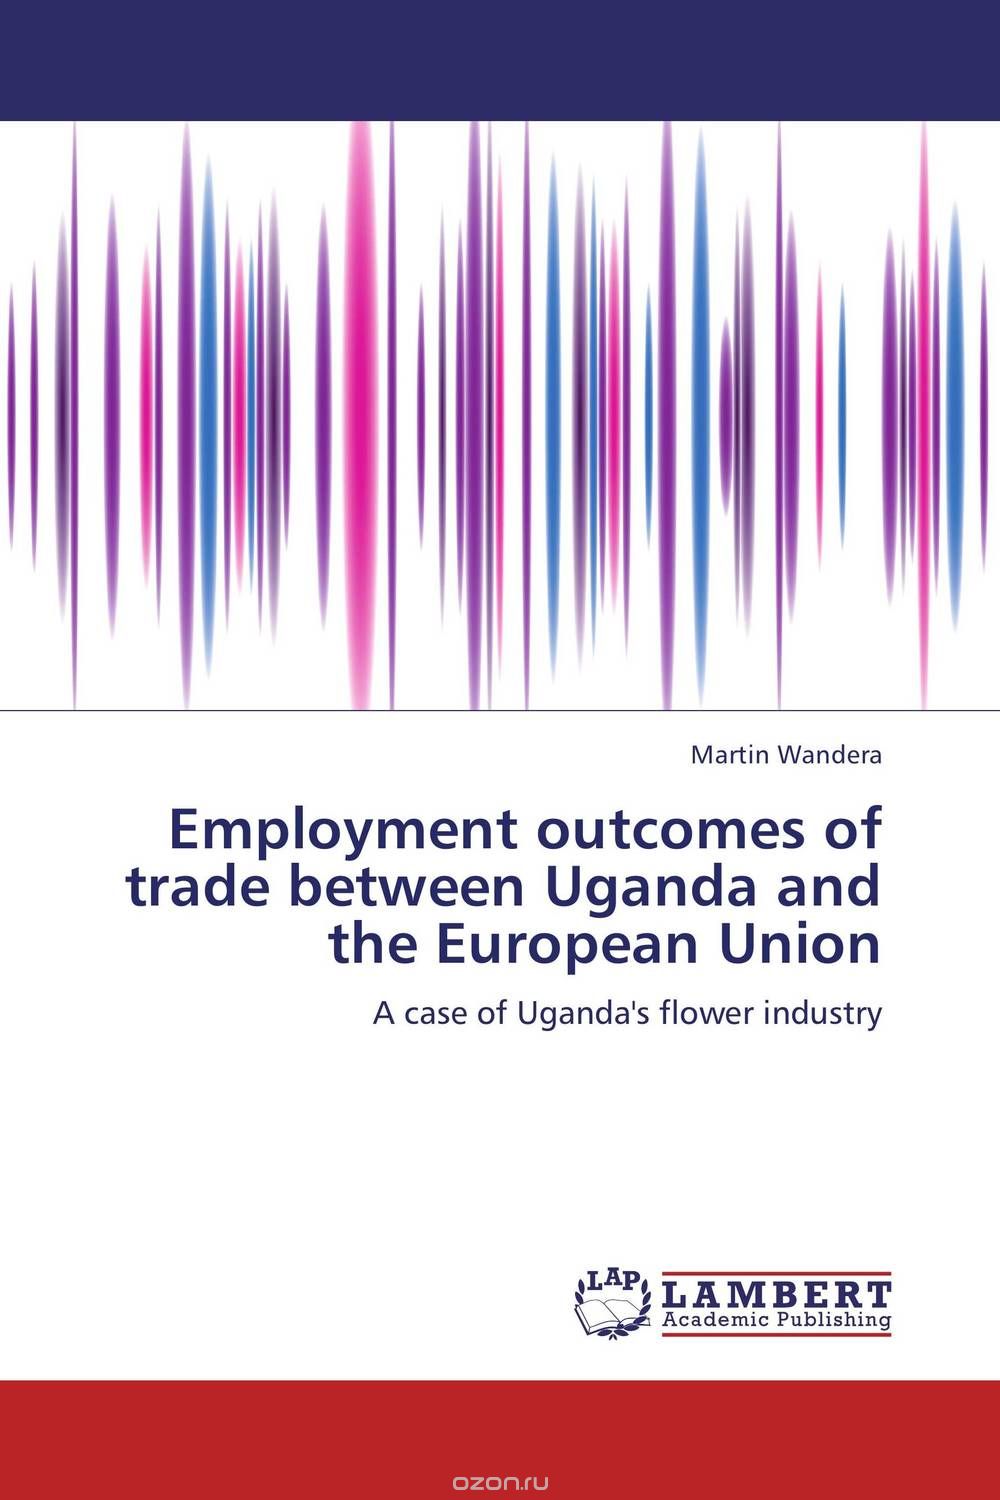 Employment outcomes of trade between Uganda and the European Union